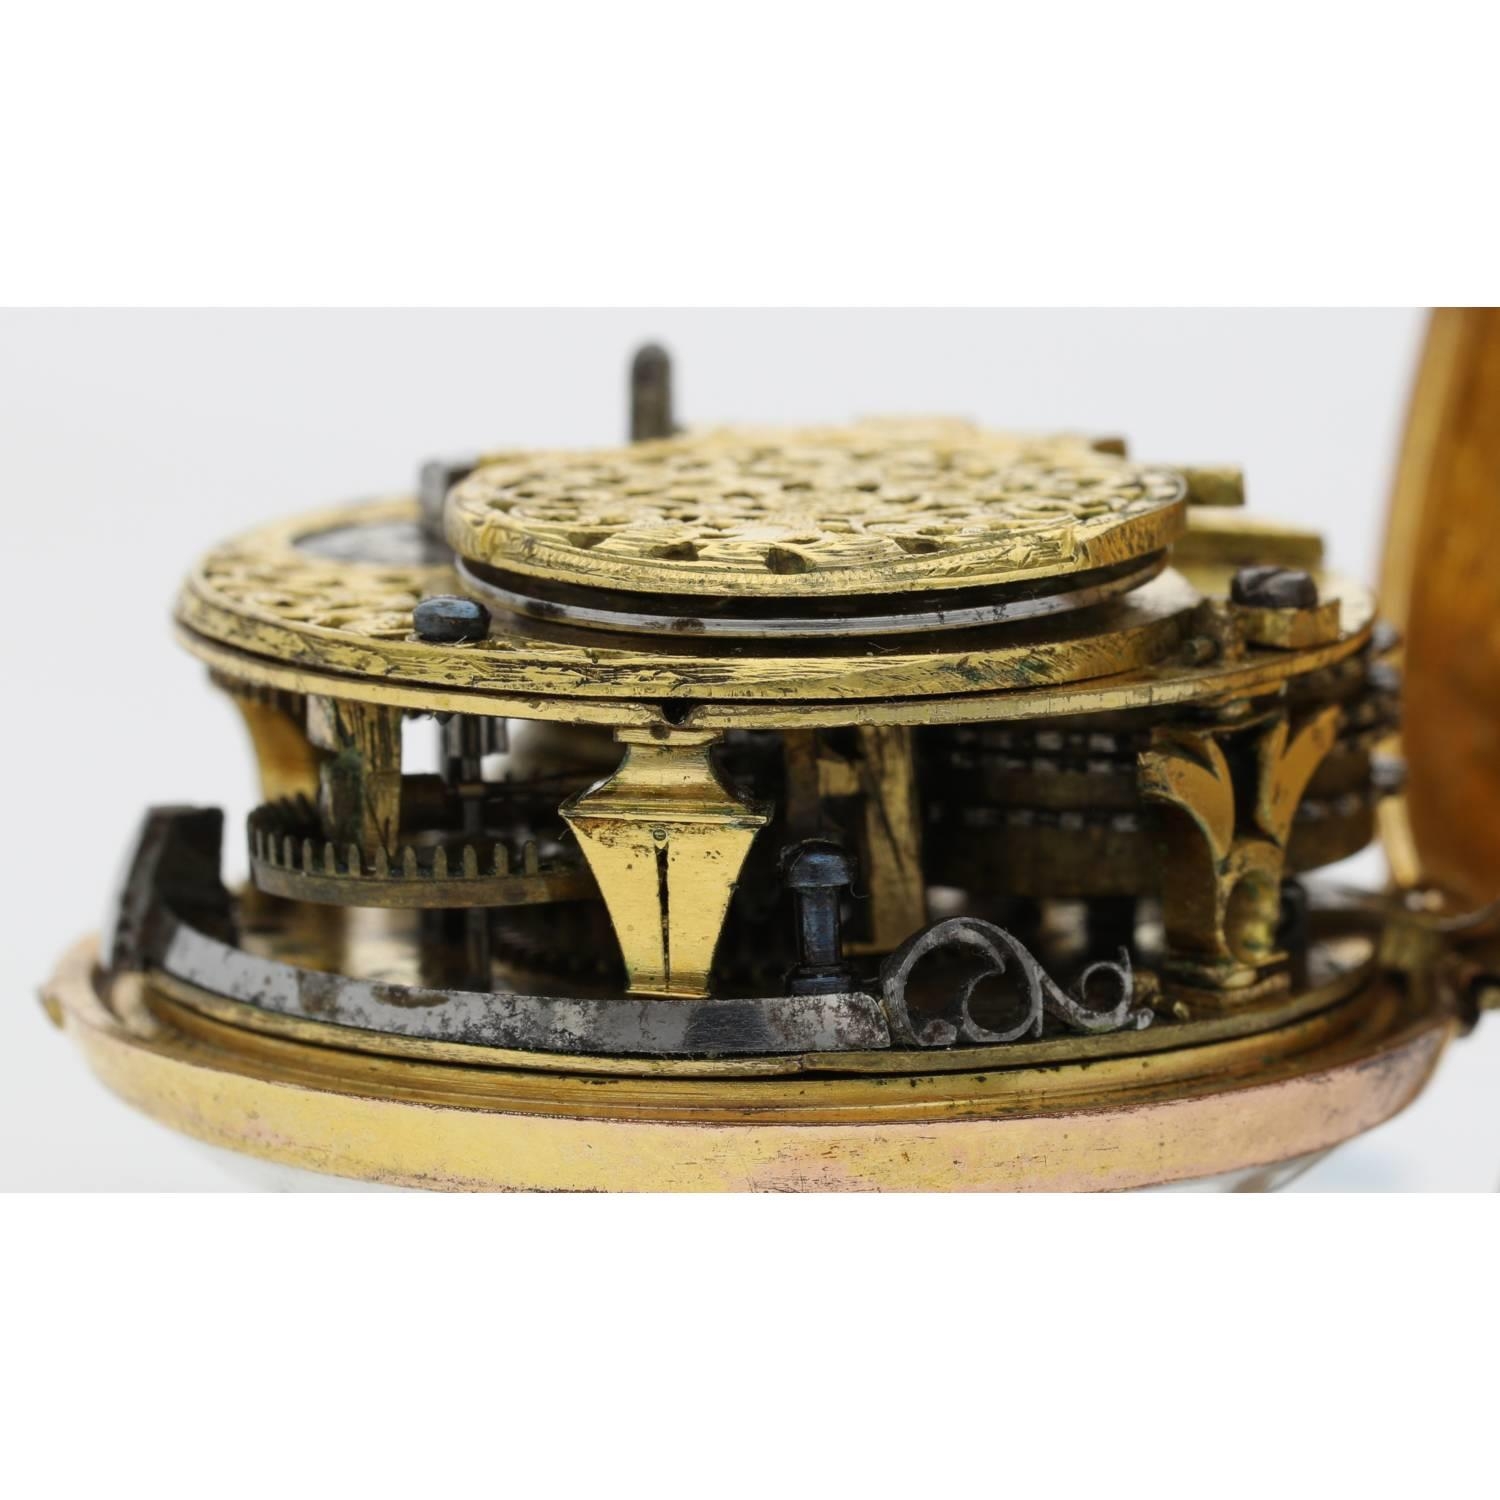 Symons, London - late 17th century English gold and gilt pair cased verge pocket watch, signed - Image 6 of 11